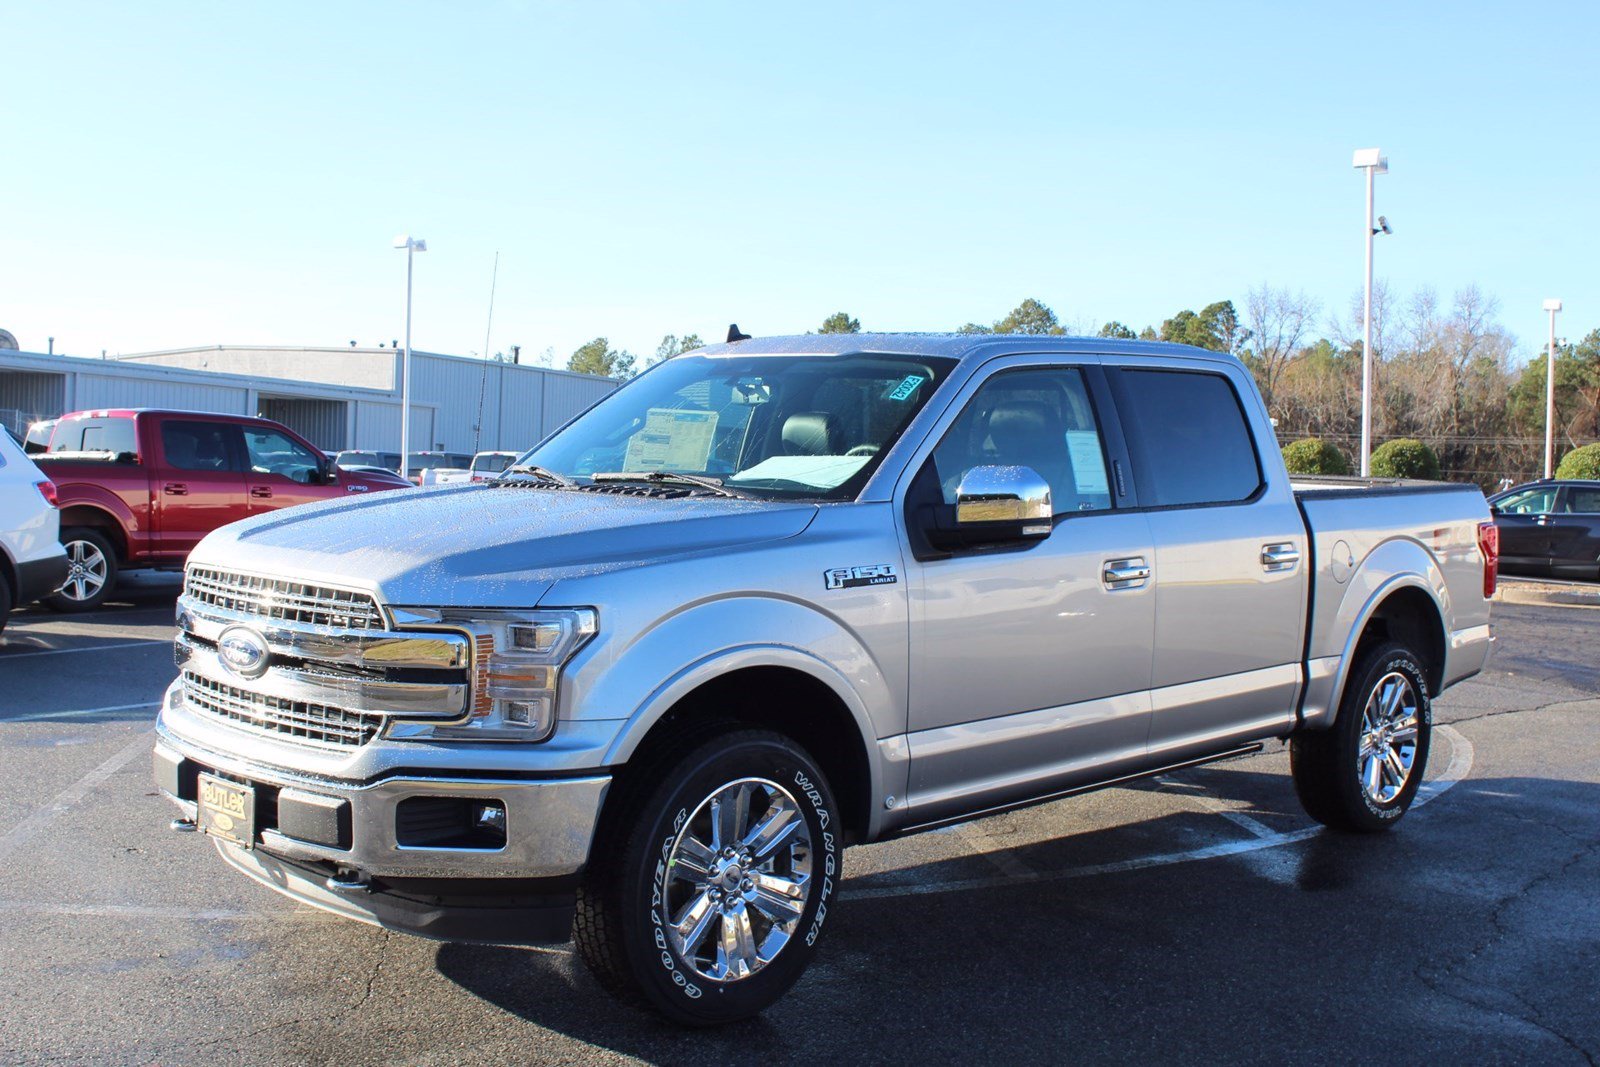 New 2020 Ford F-150 LARIAT Crew Cab Pickup in Milledgeville #F20042 ...